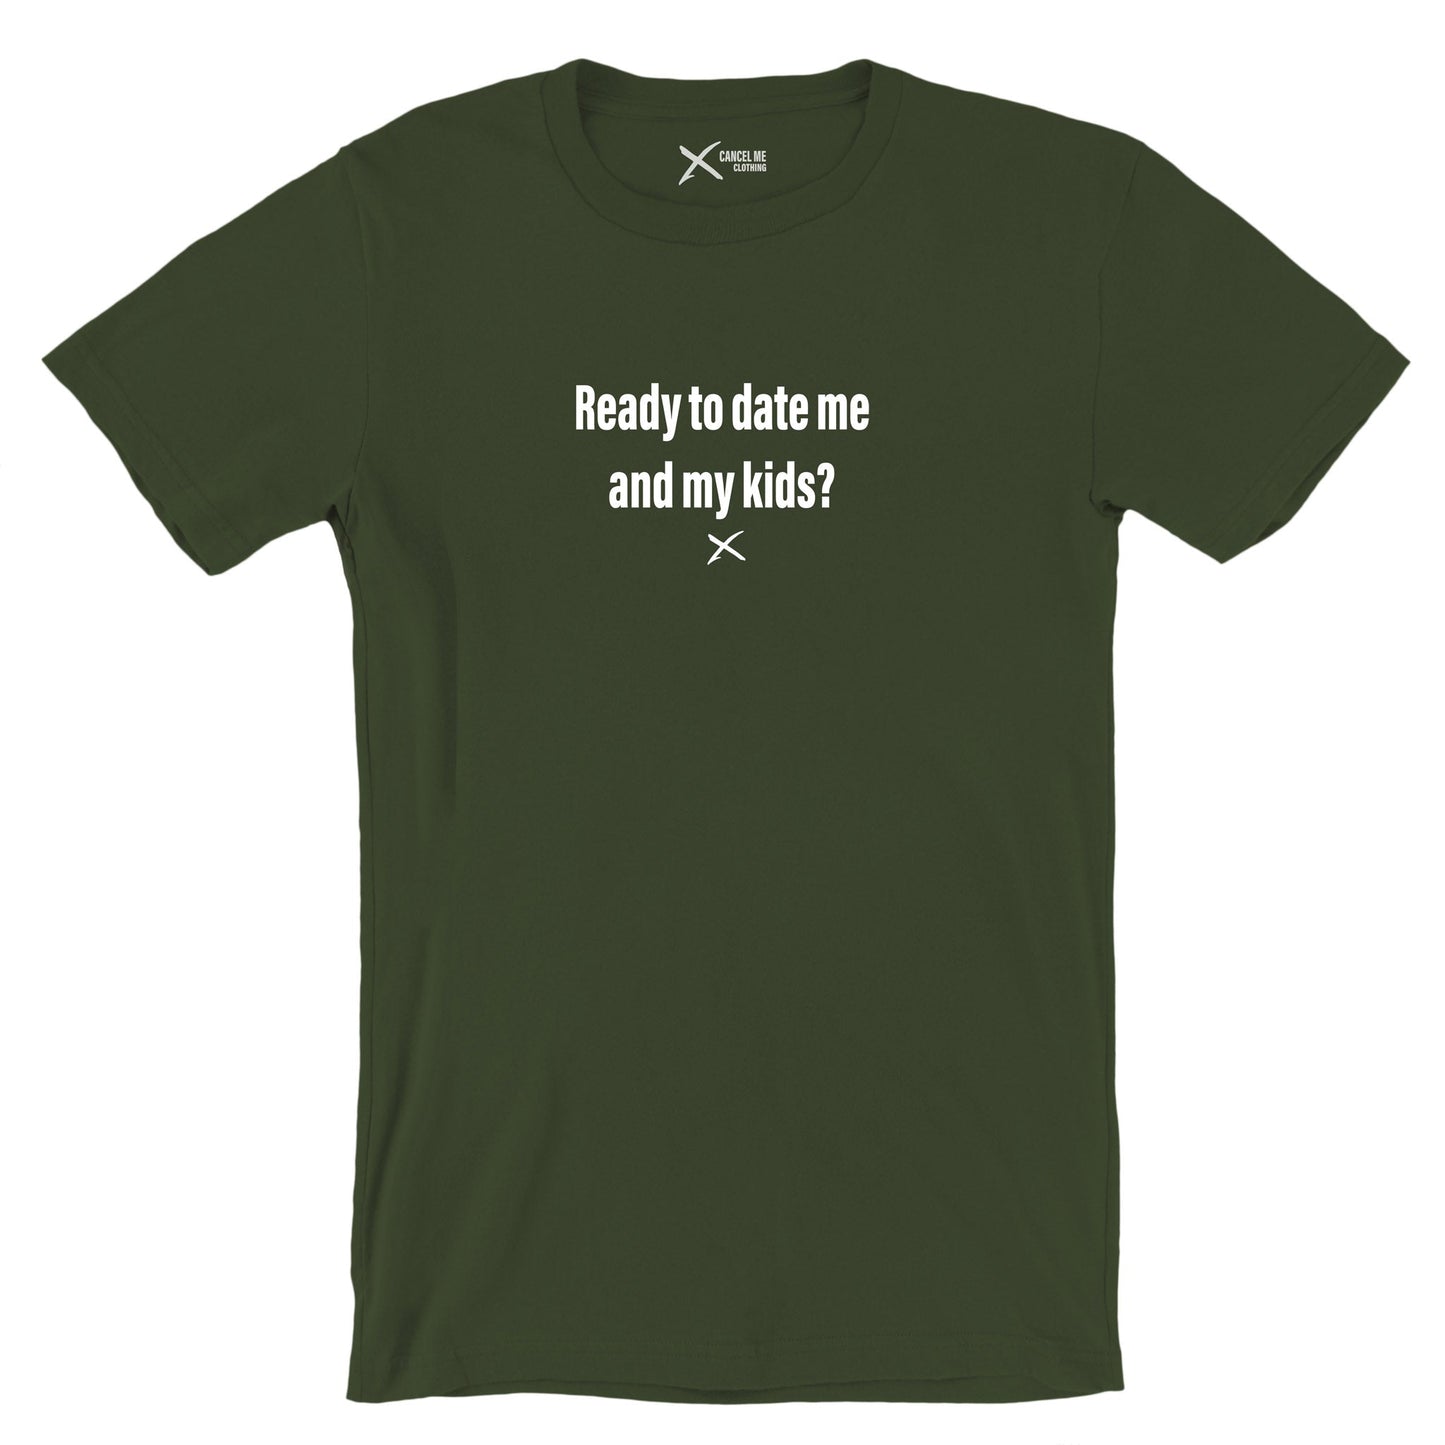 Ready to date me and my kids? - Shirt